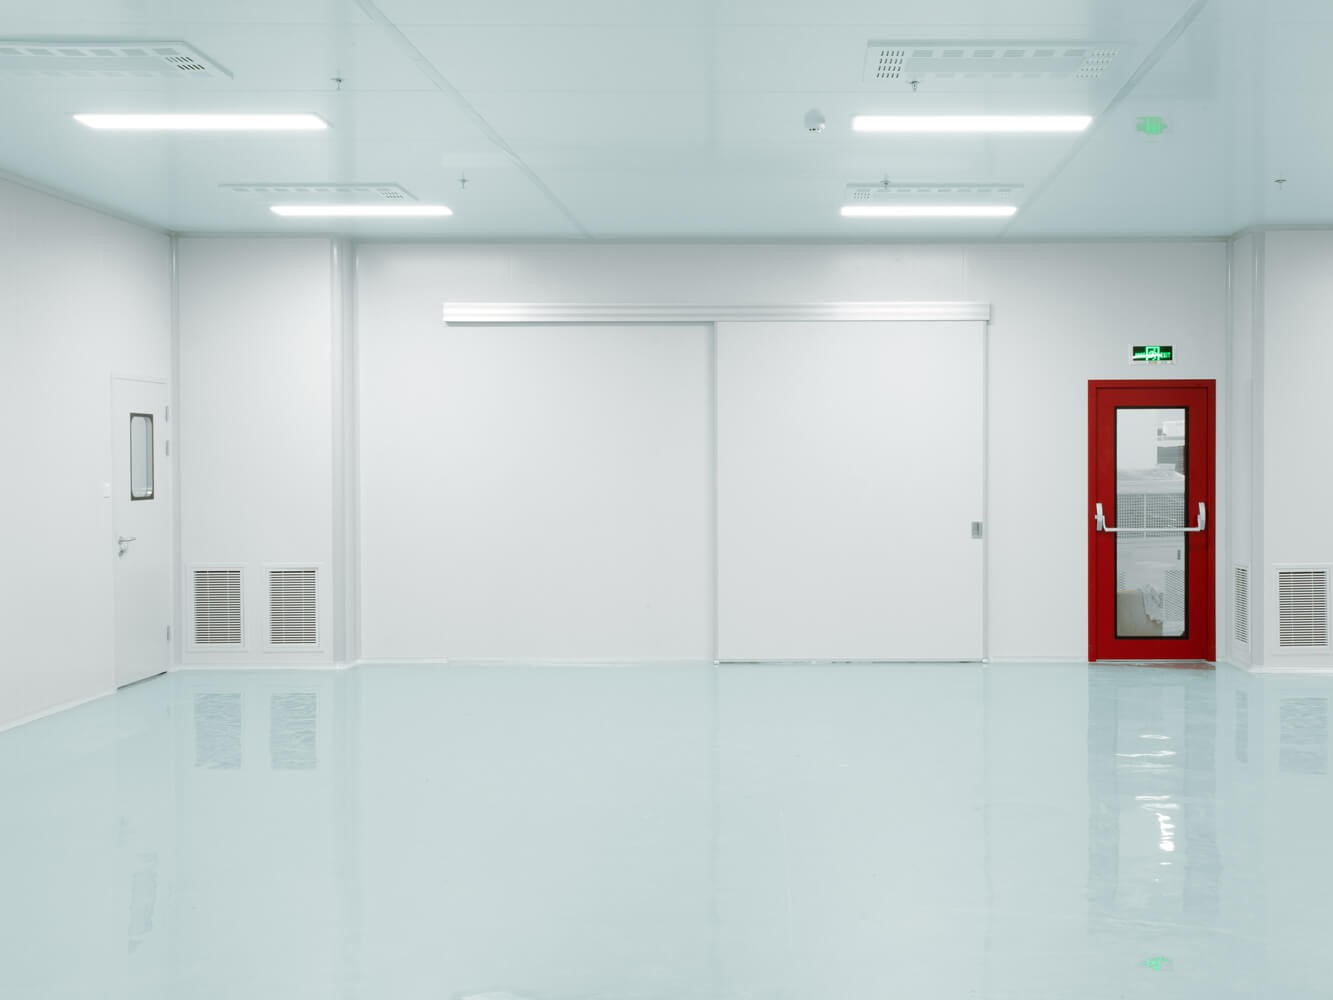 WHAT FACTORS WILL AFFECT CLEAN ROOM CONSTRUCTION TIME?